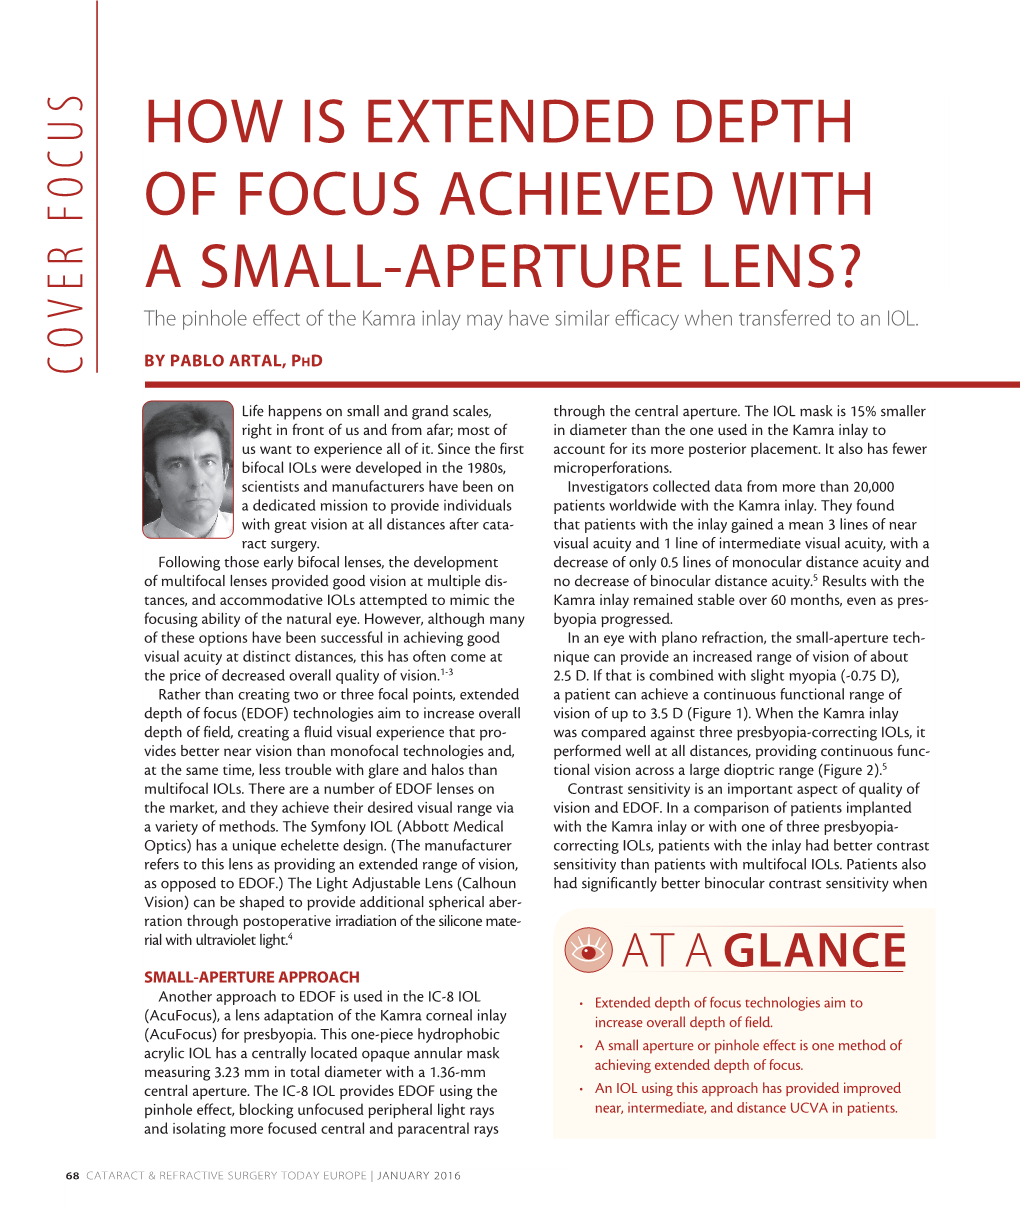 HOW IS EXTENDED DEPTH of FOCUS ACHIEVED with a SMALL-APERTURE LENS? the Pinhole Effect of the Kamra Inlay May Have Similar Efficacy When Transferred to an IOL